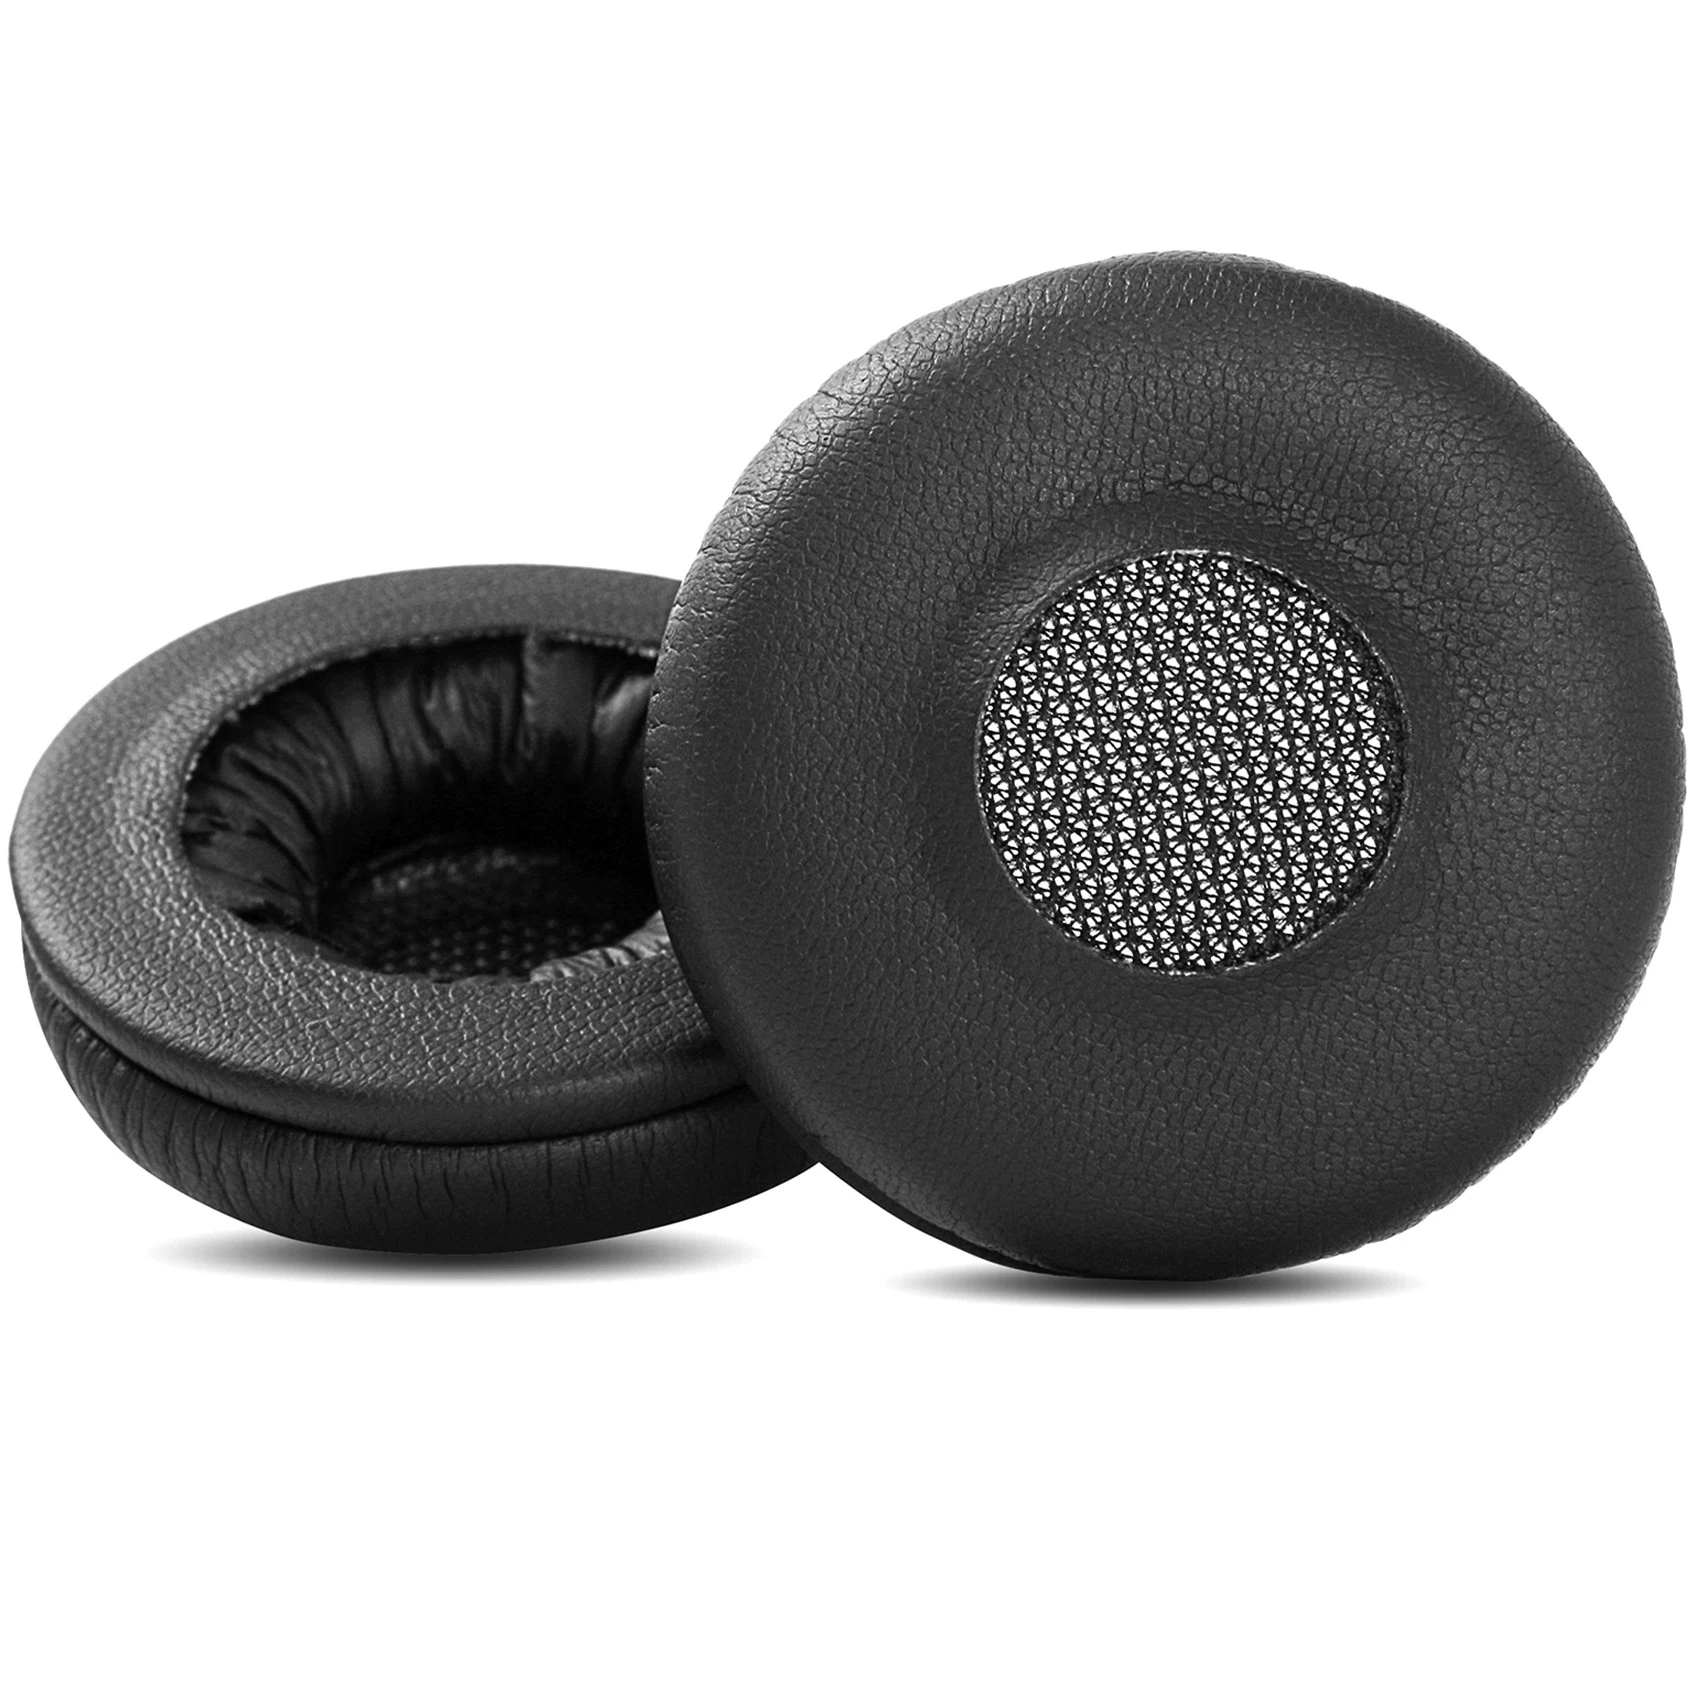 Medewerker Master diploma cafe Earpads Foam Replacement Ear Pads Pillow Cushion Cover Cups Repair Parts  For Jabra Bt620s Bt 620s Bluetooth Headphones Headset - Protective Sleeve -  AliExpress